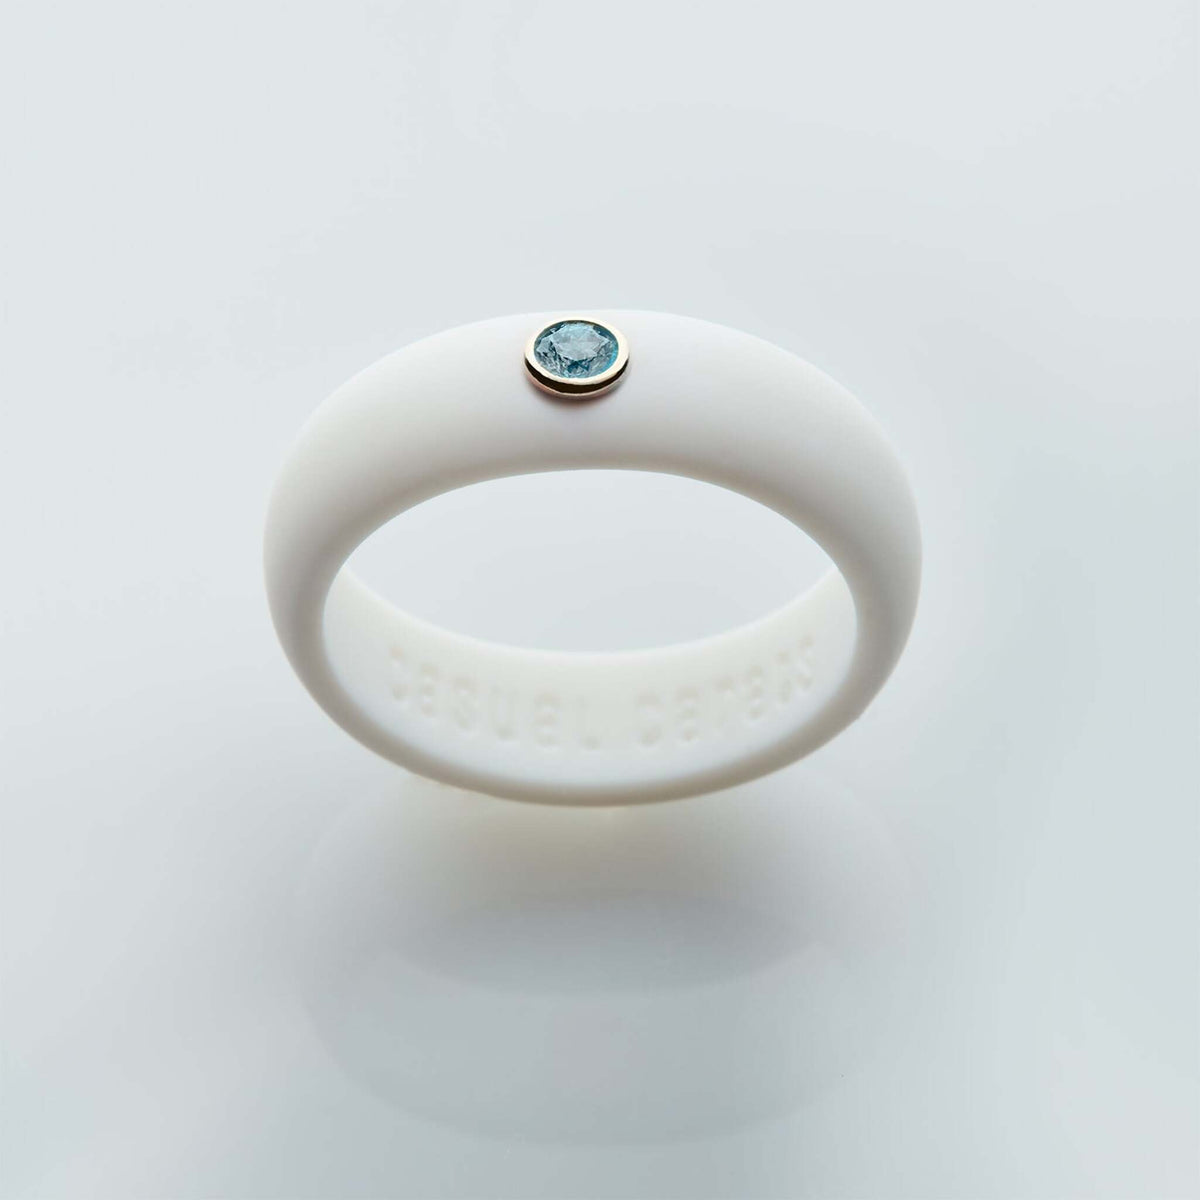 Casual Carats - Birthstone Collection - March - Aquamarine Silicone Ring / Available in a Variety of Silicone Band Colors